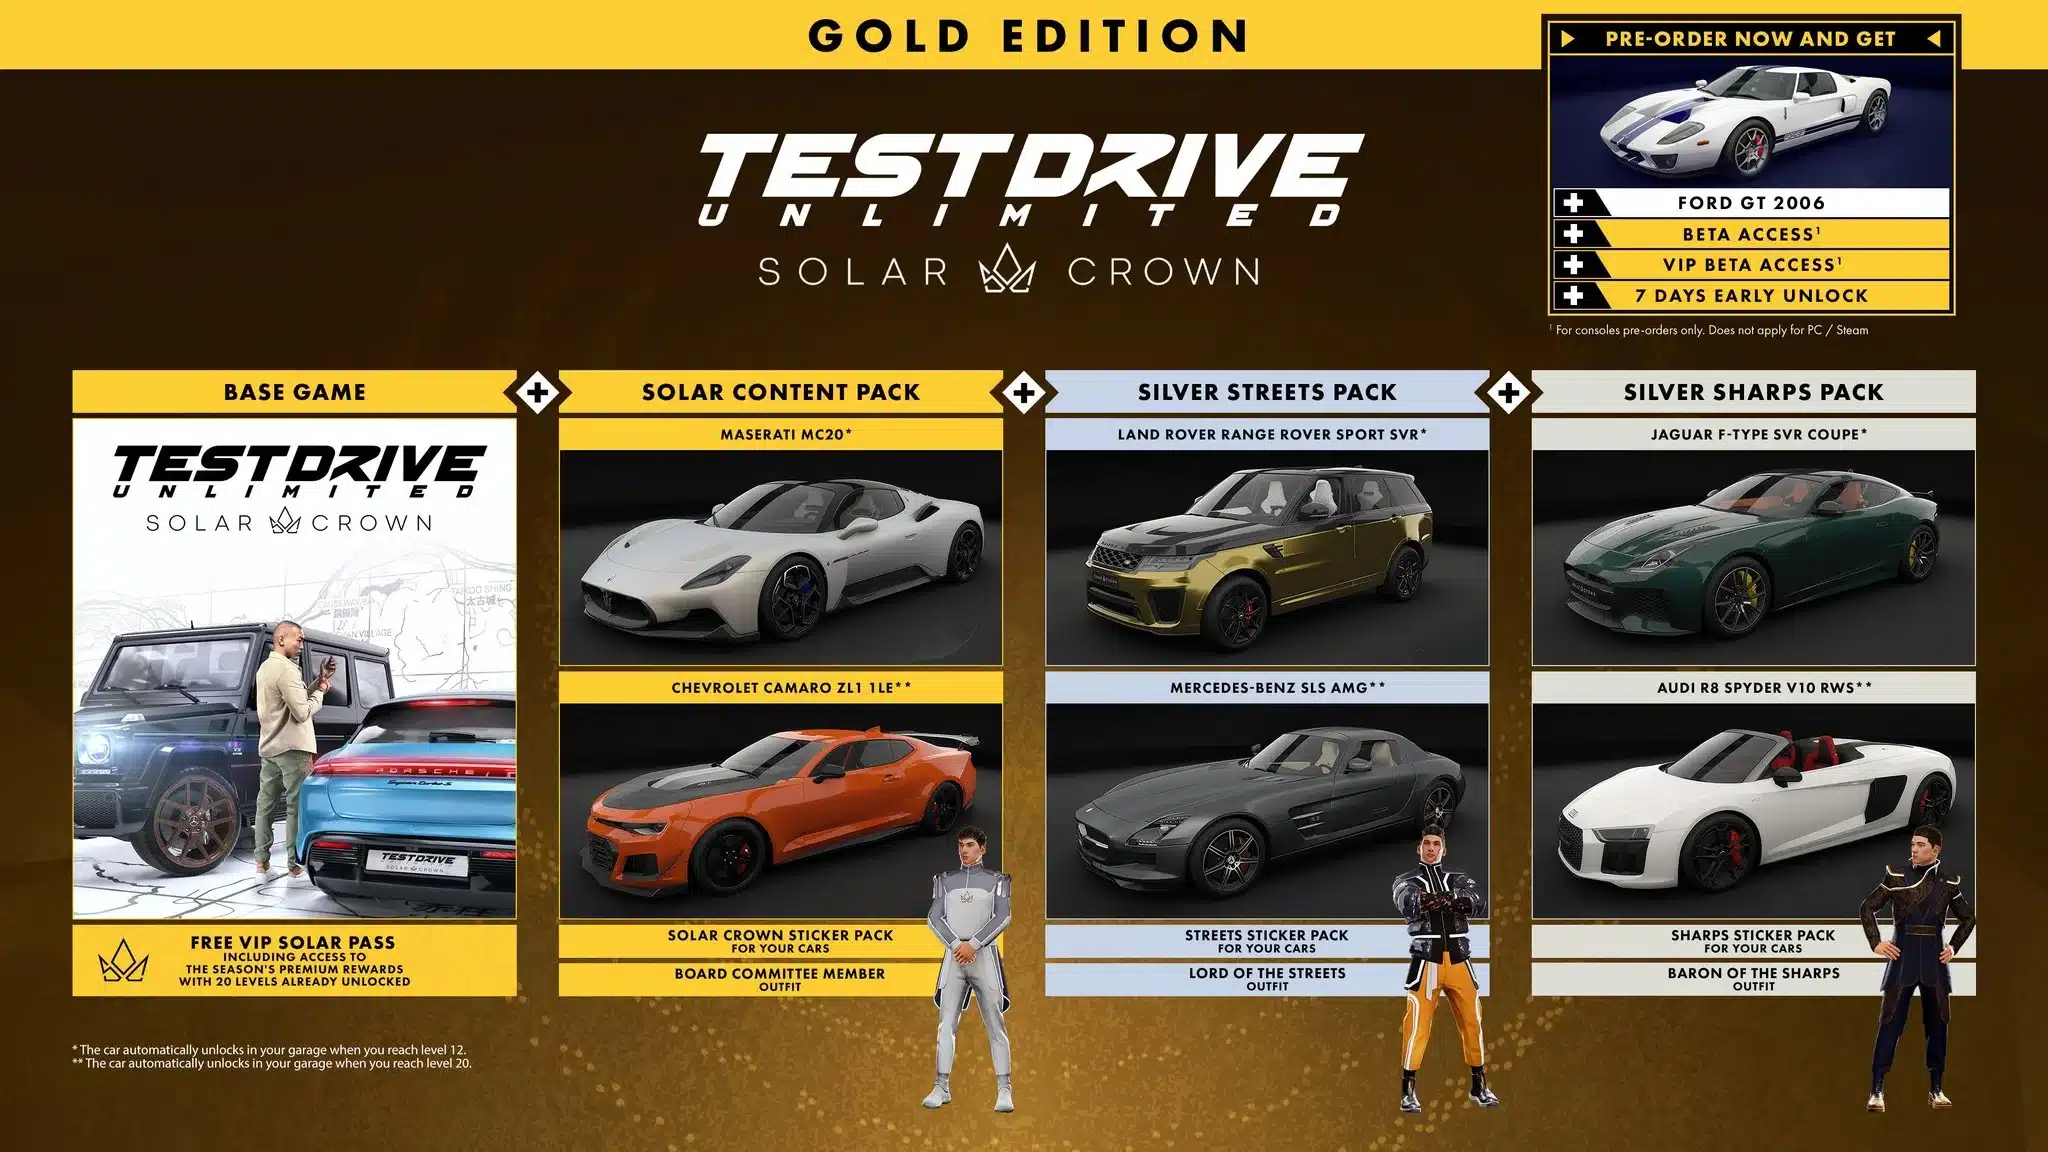 Test drive unlimited solar crown editions gold edition 4